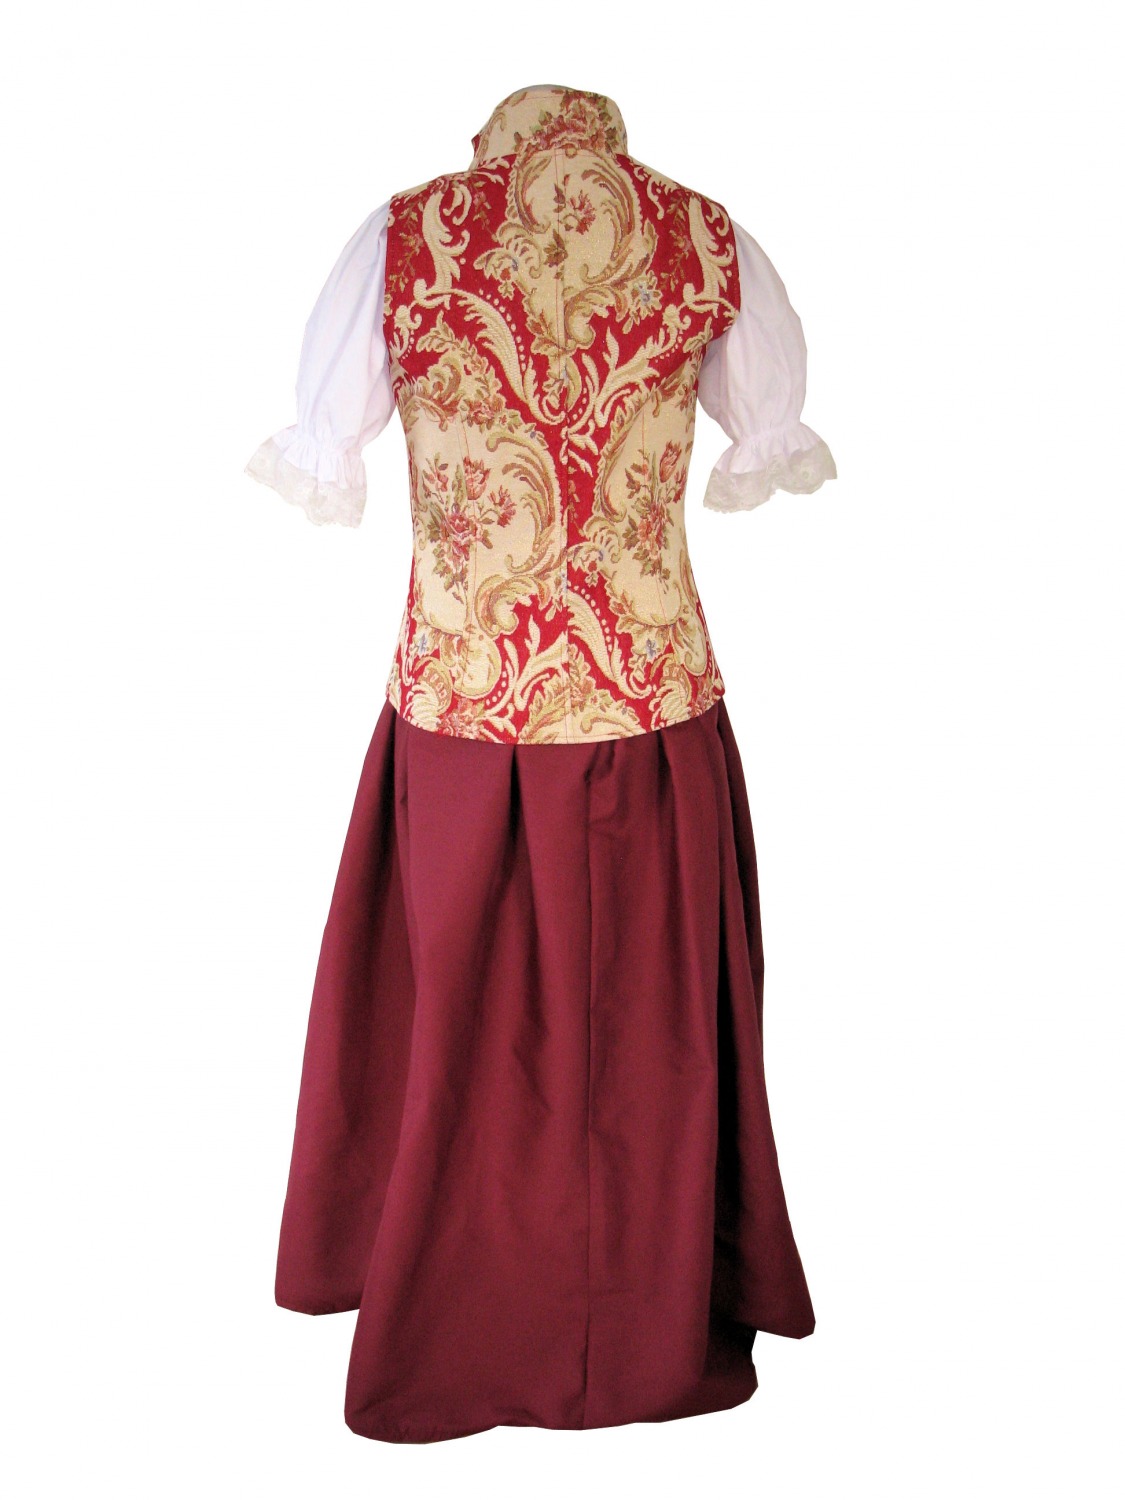 Ladies Medieval Wench Costume Victorian Nancy From Oliver Twist Costume  Size 12 - 14 - Complete Costumes, Costume Hire